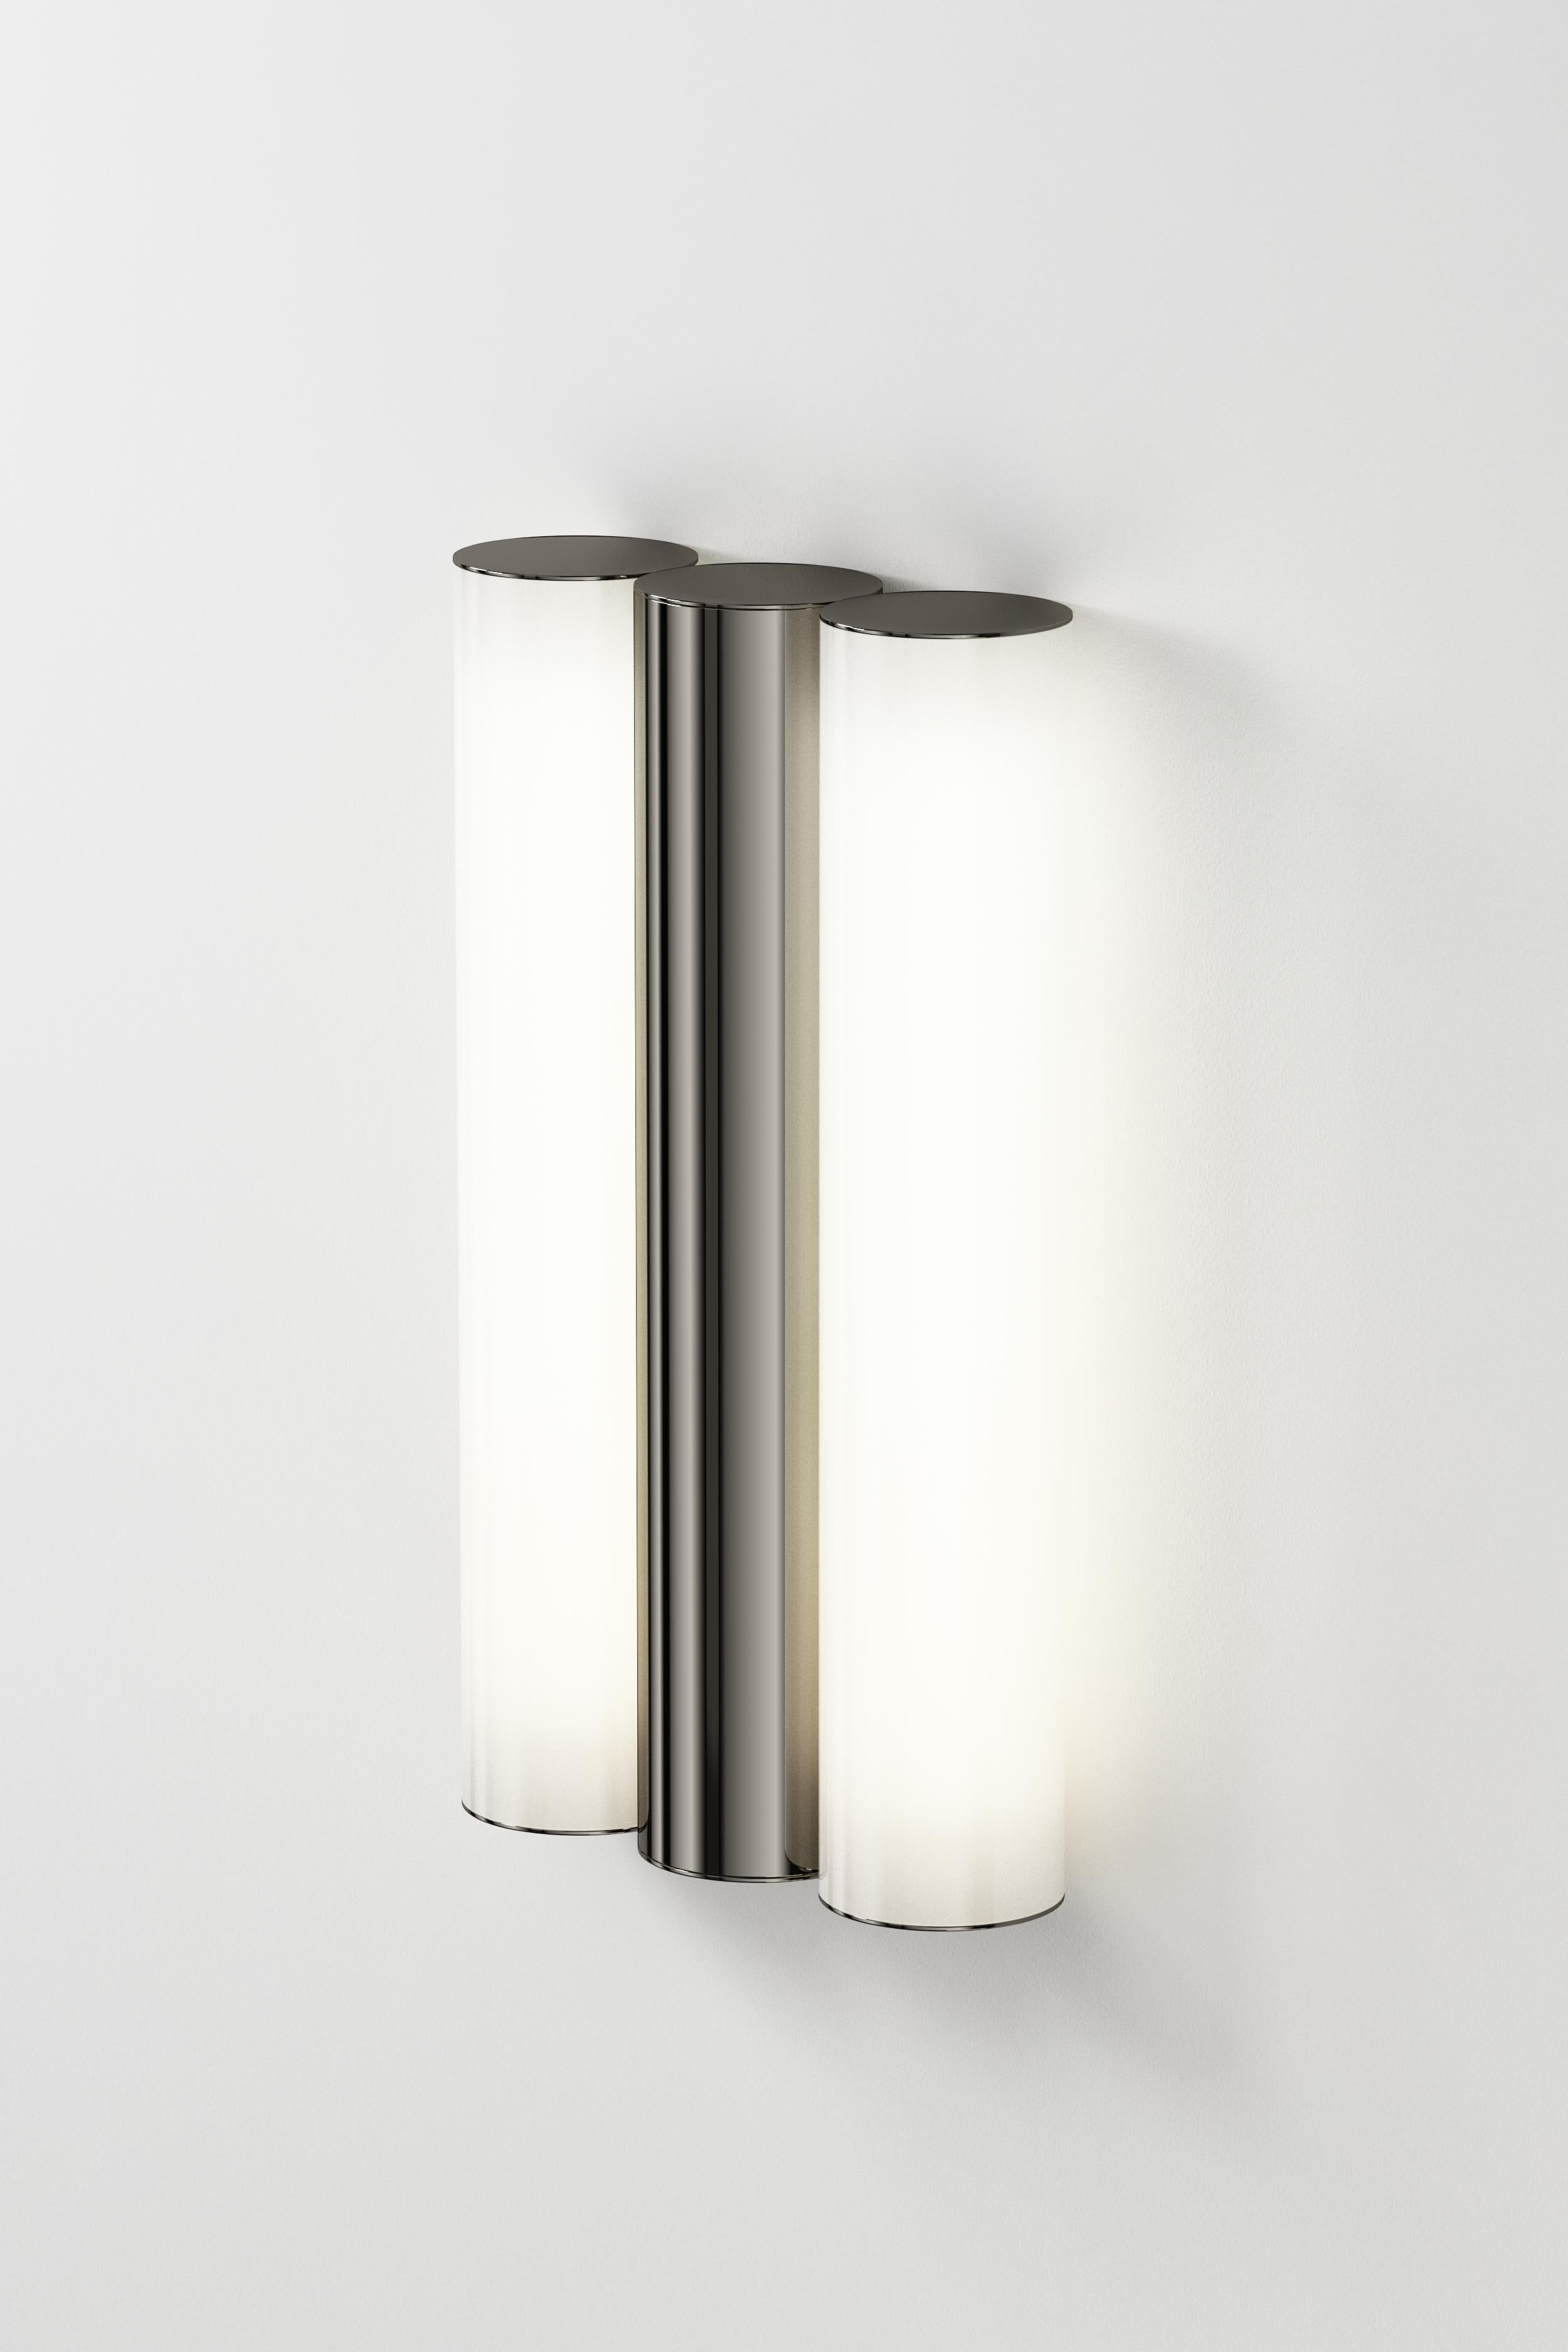 IP gamma polished graphite wall light by Sylvain Willenz
Dimensions: D15.2 x W5 X H28.4 cm
Materials: solid brass, polished graphite
Others finishes are available.

All our lamps can be wired according to each country. If sold to the USA it